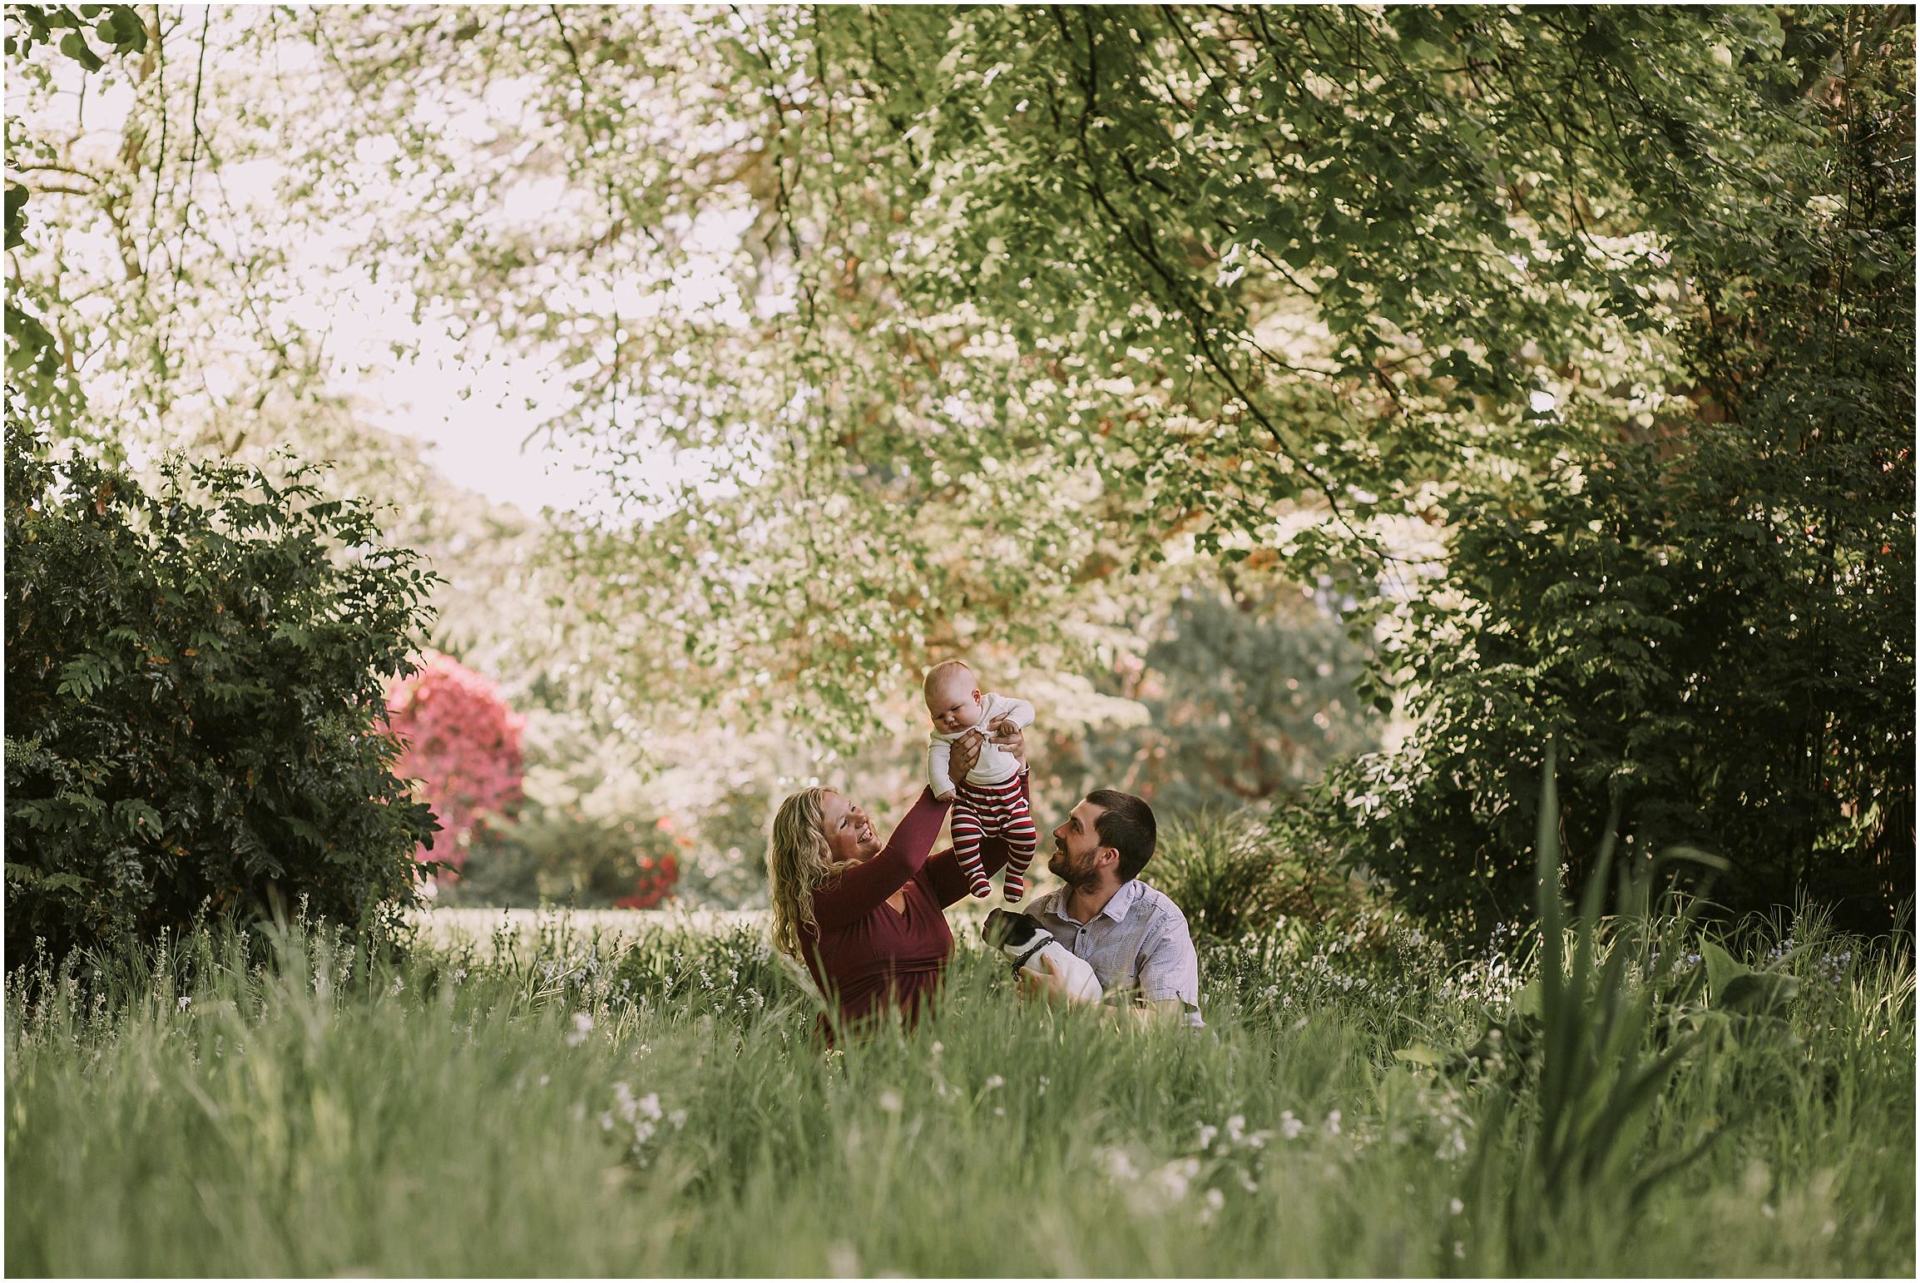 Charlotte Kiri Photography - Family Photography of a couple holding their baby up high as they look on adoringly, whilst sitting in the grass among trees and flowers in Wanaka, New Zealand.